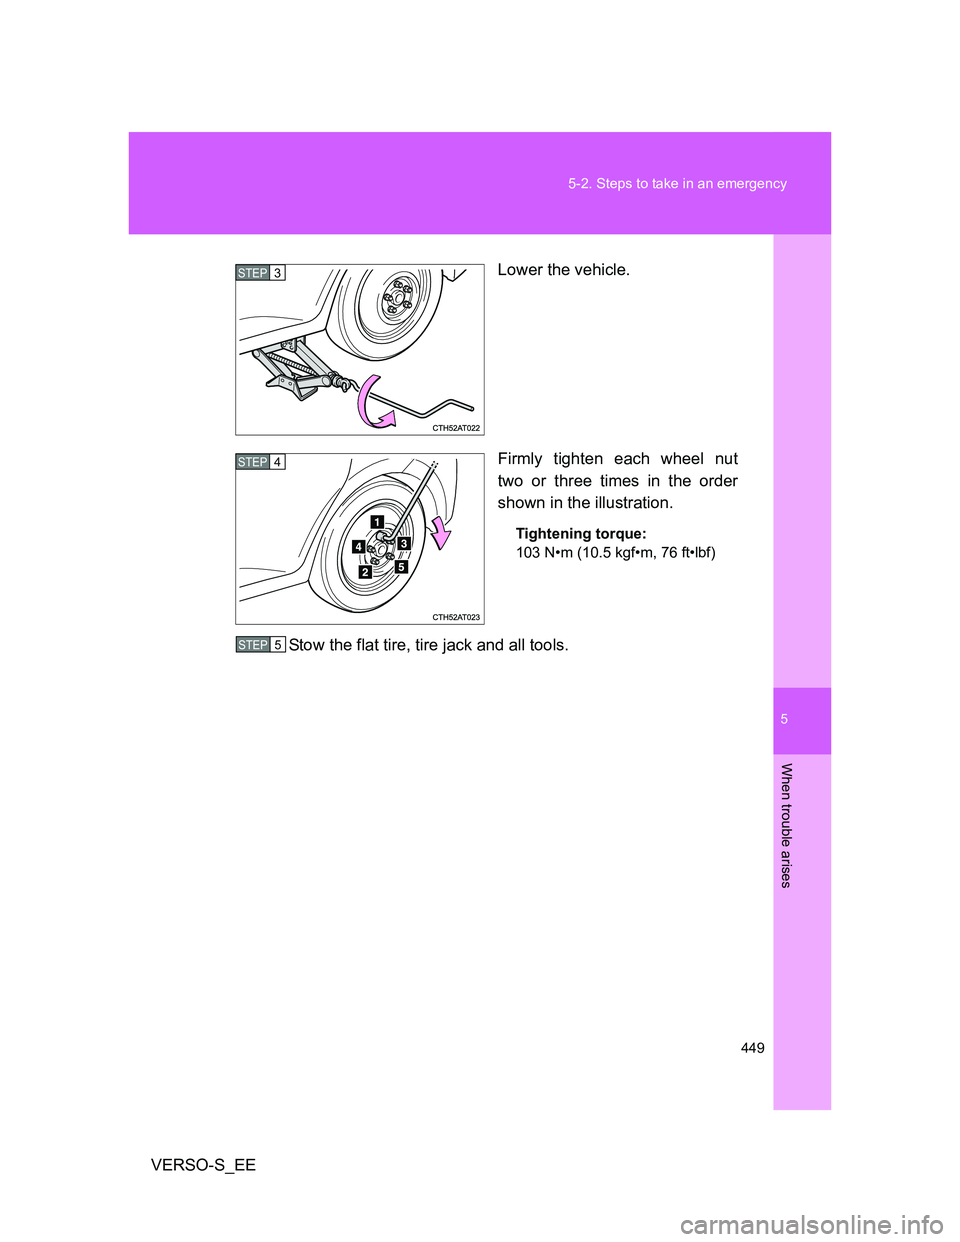 TOYOTA VERSO S 2012  Owners Manual 5
449 5-2. Steps to take in an emergency
When trouble arises
VERSO-S_EELower the vehicle.
Firmly tighten each wheel nut
two or three times in the order
shown in the illustration.
Tightening torque:
10